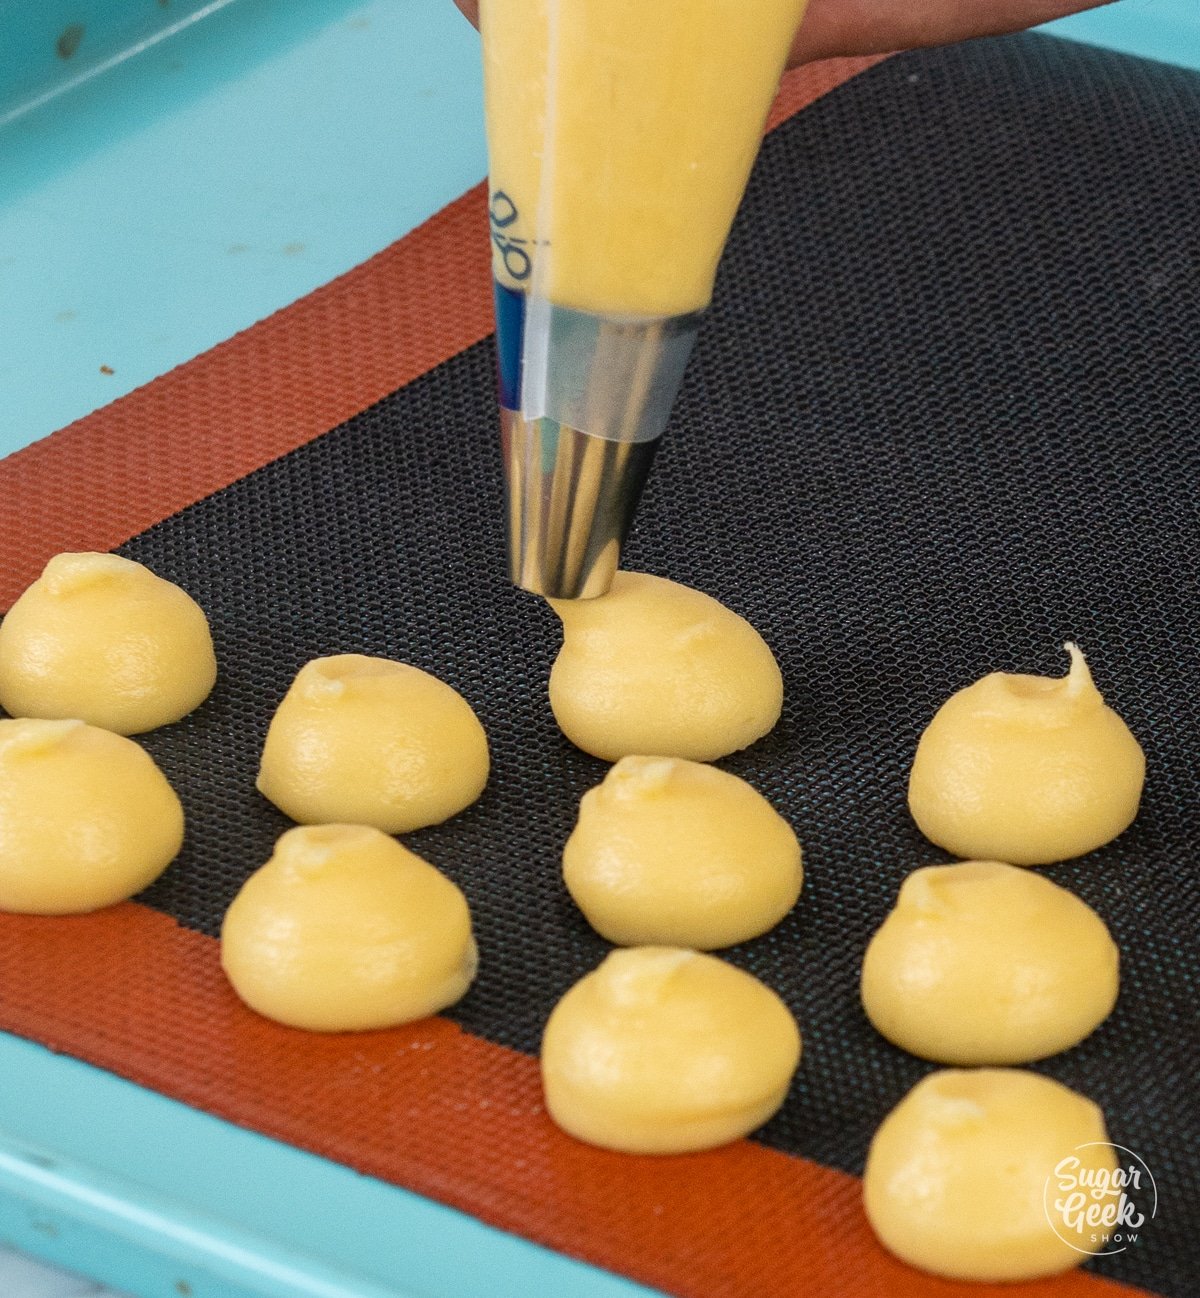 Piping choux dough into small round spheres on a baking sheet pan.